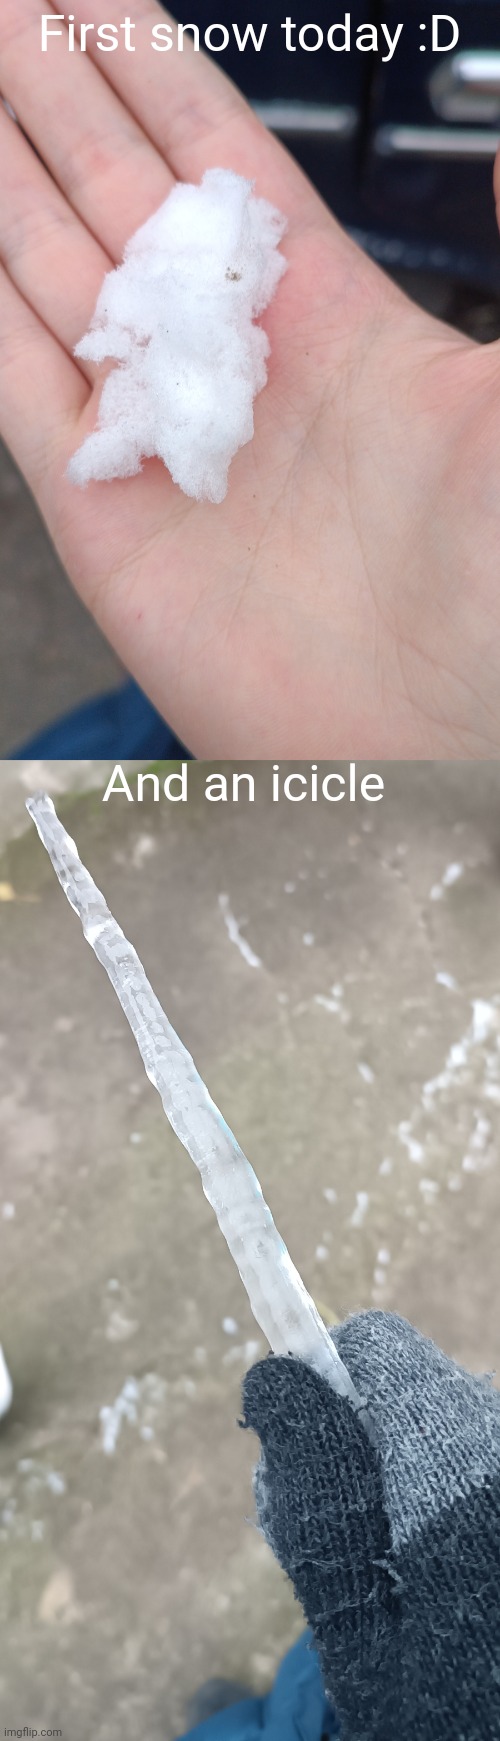 First snow today :D; And an icicle Blank Meme Template